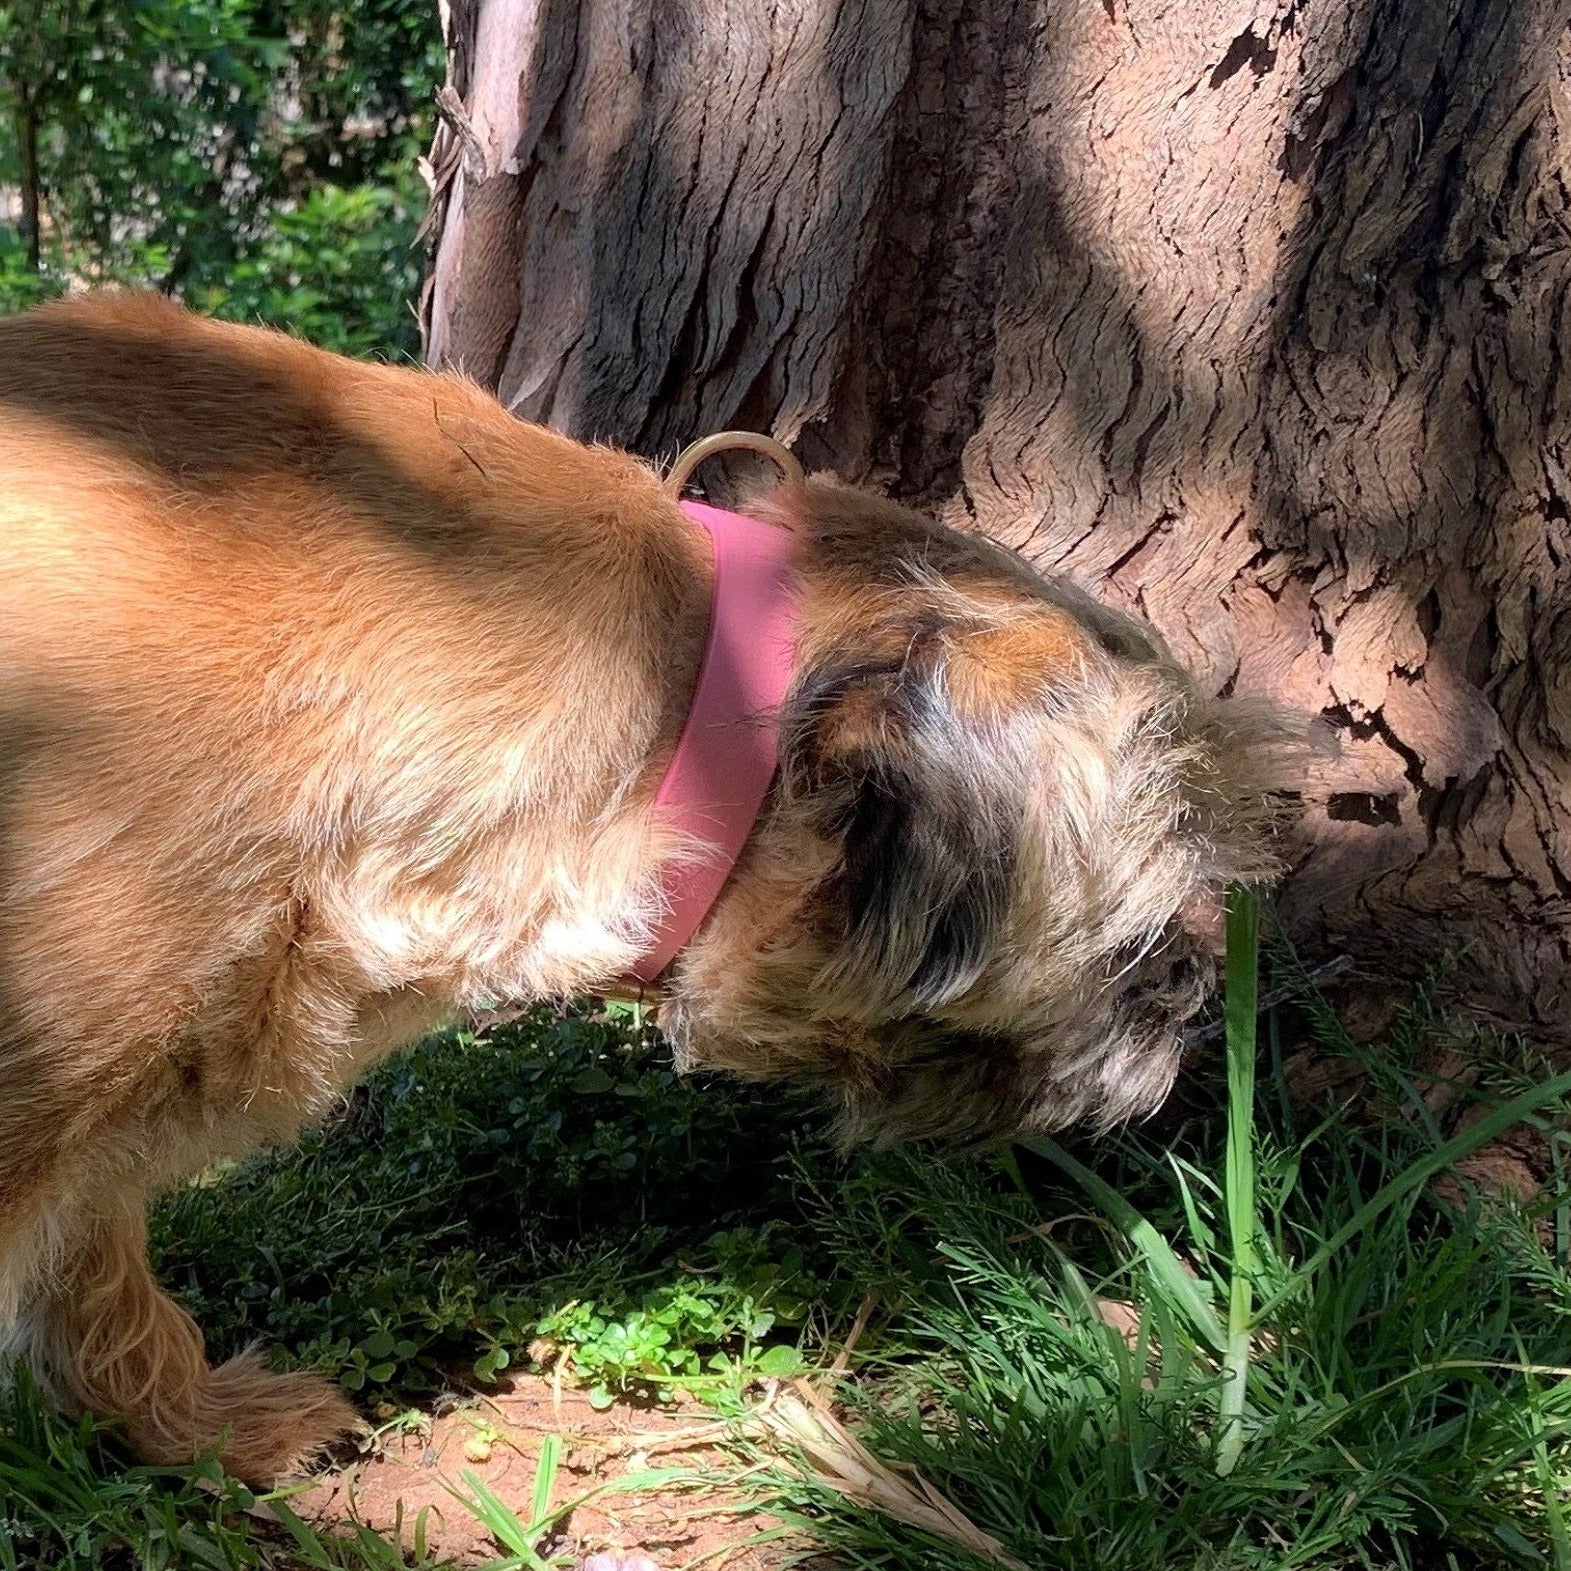 A small brown dog with a shaggy coat and a vintage-style brass hardware Georgie Paws Bald Collar Pink is intently sniffing or examining something on the ground. The dog is next to a tree with rough, textured bark, and there is green grass and patches of dirt surrounding the area. Sunlight and shadows create a dappled effect.